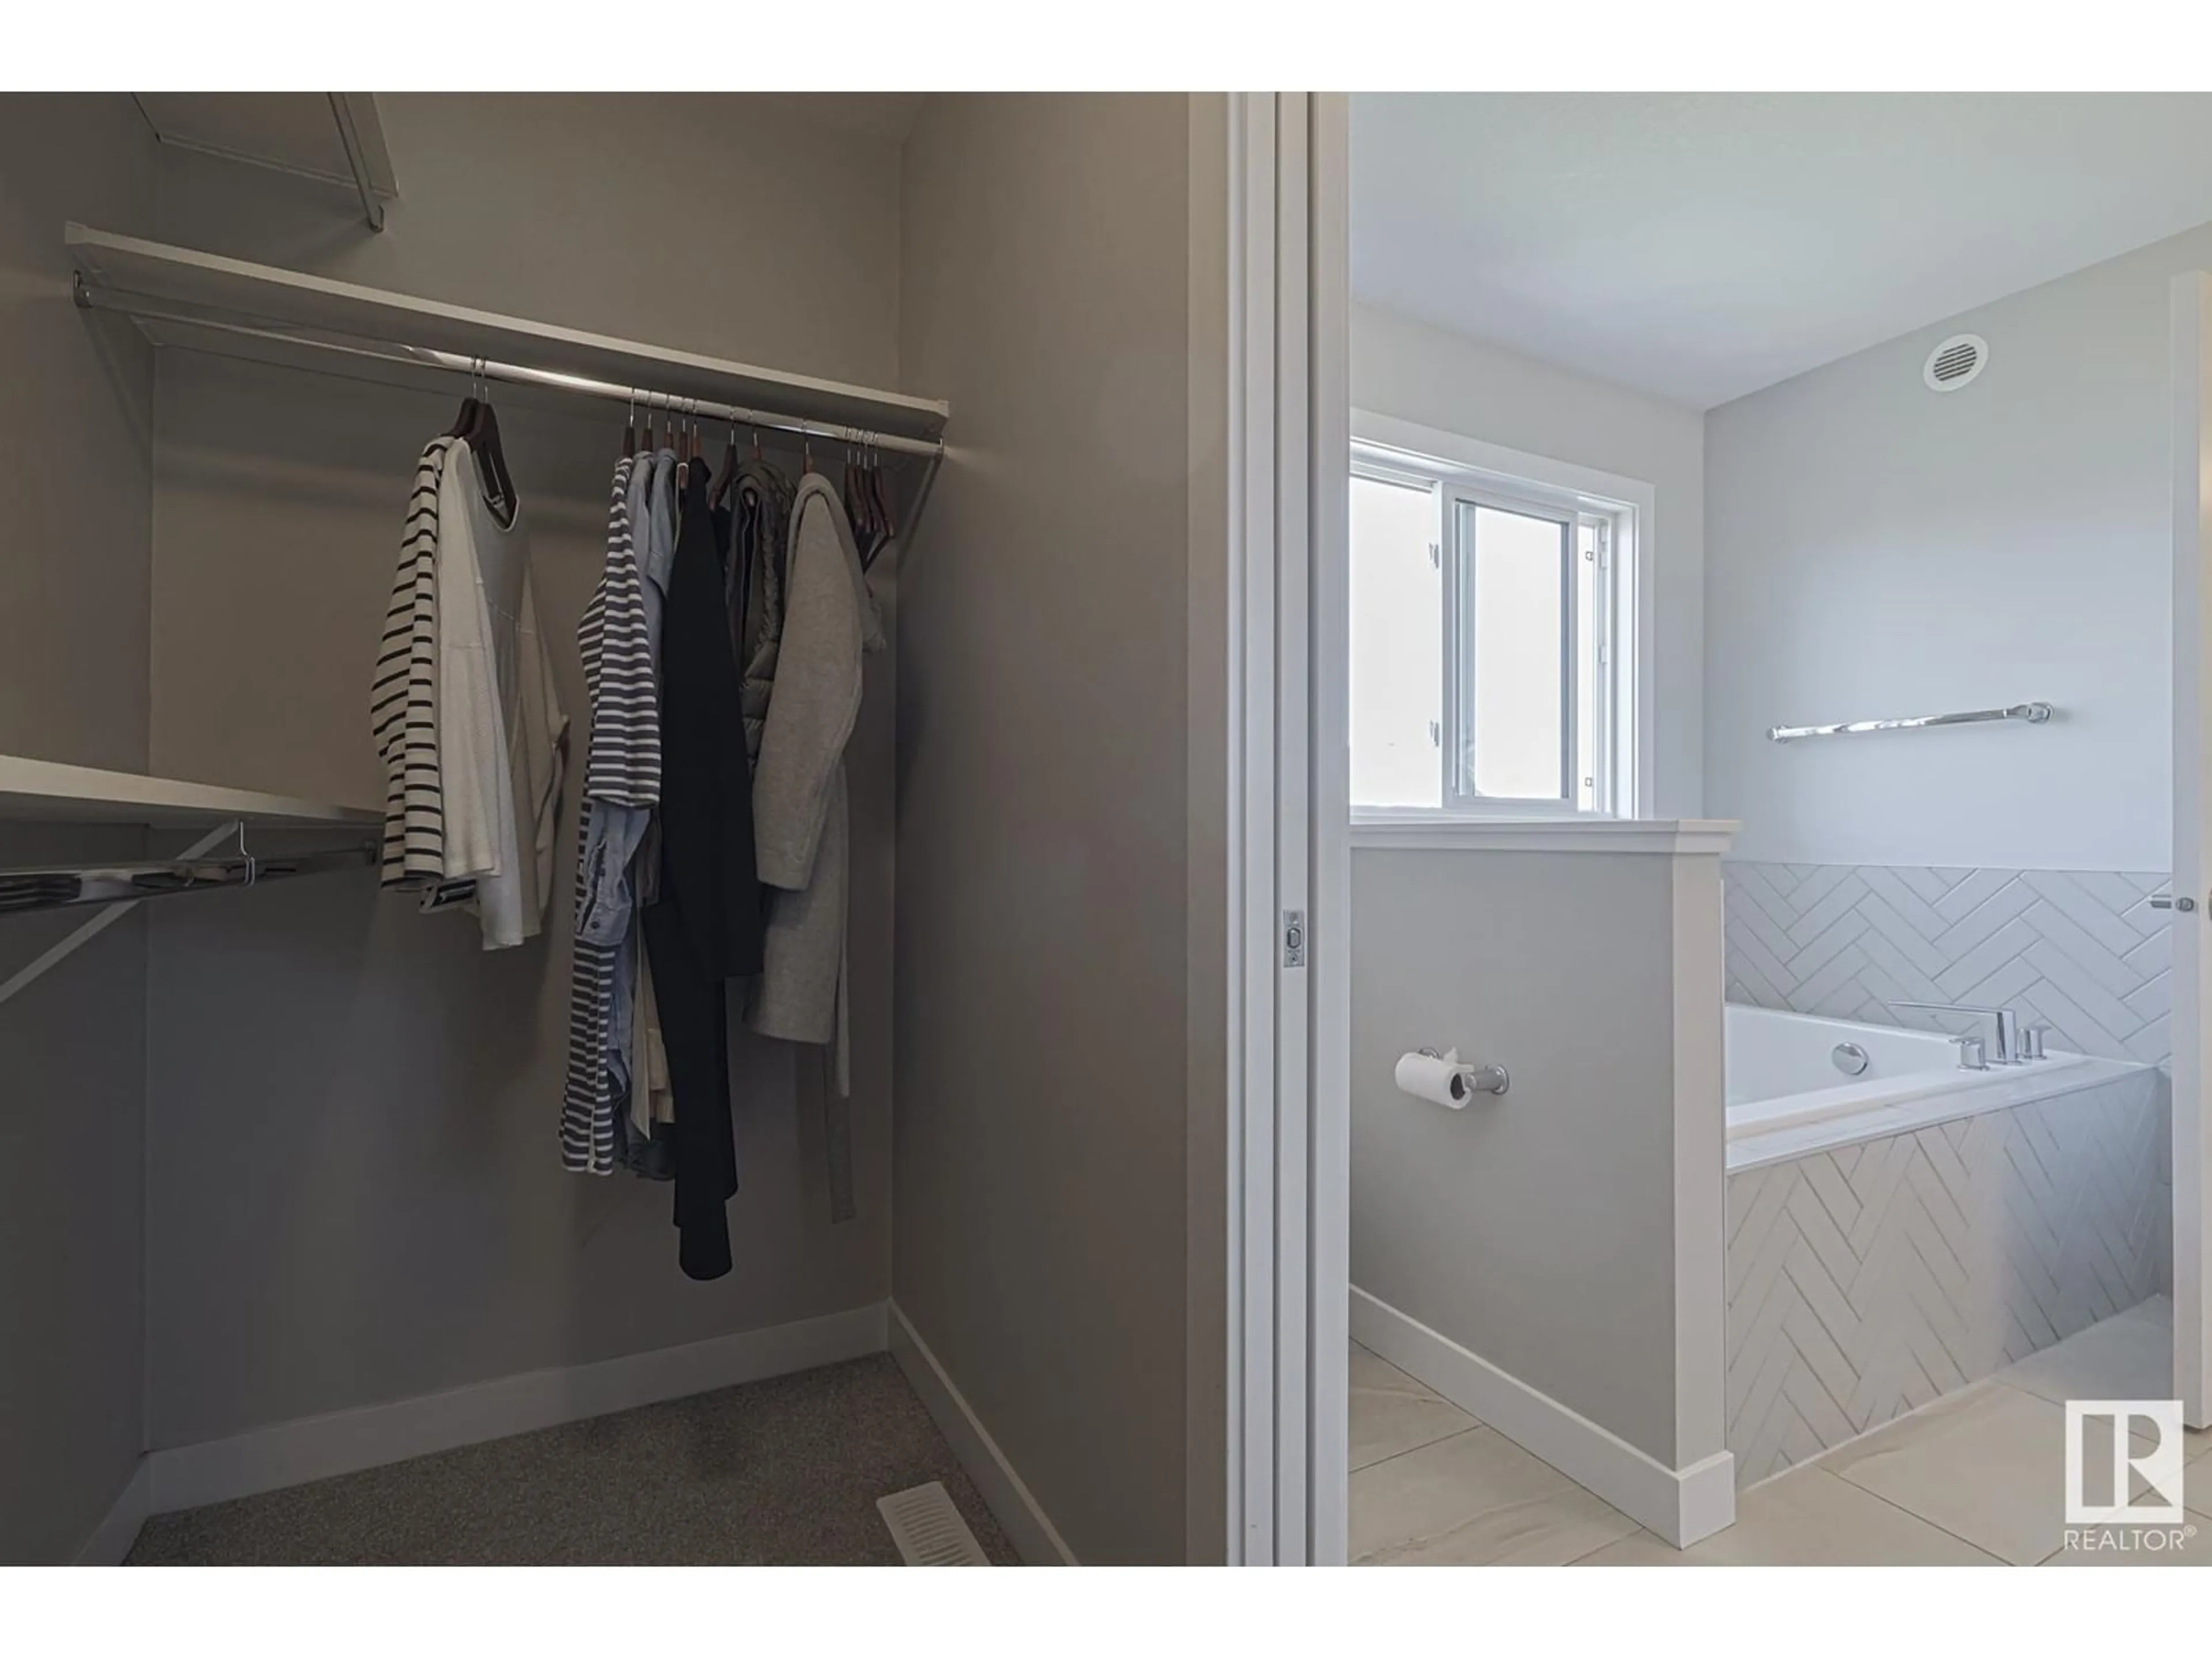 Storage room or clothes room or walk-in closet for 36 KINGSBURY CI, Spruce Grove Alberta T7X0C9